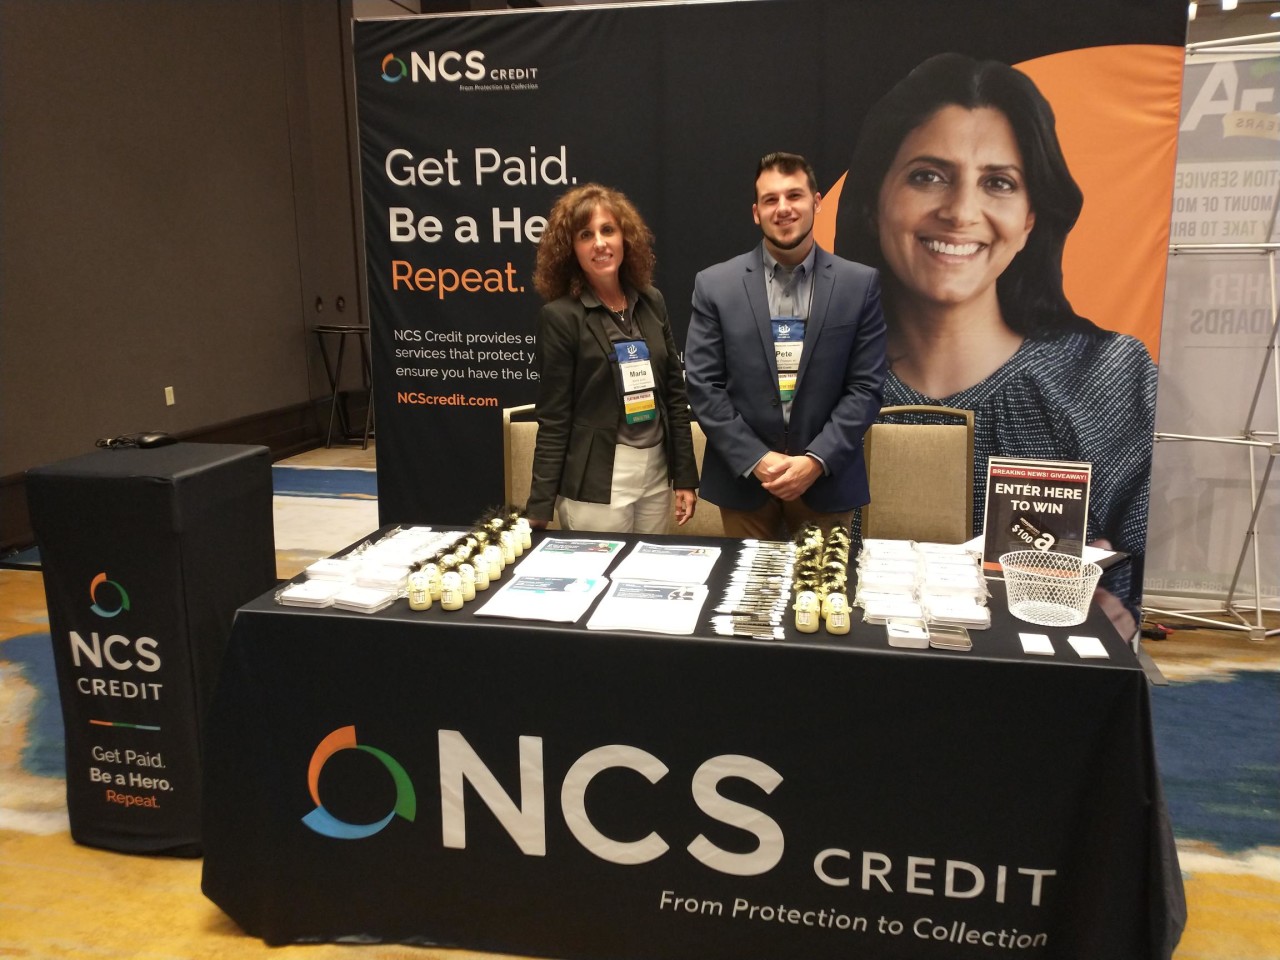 ncs credit trade show booth